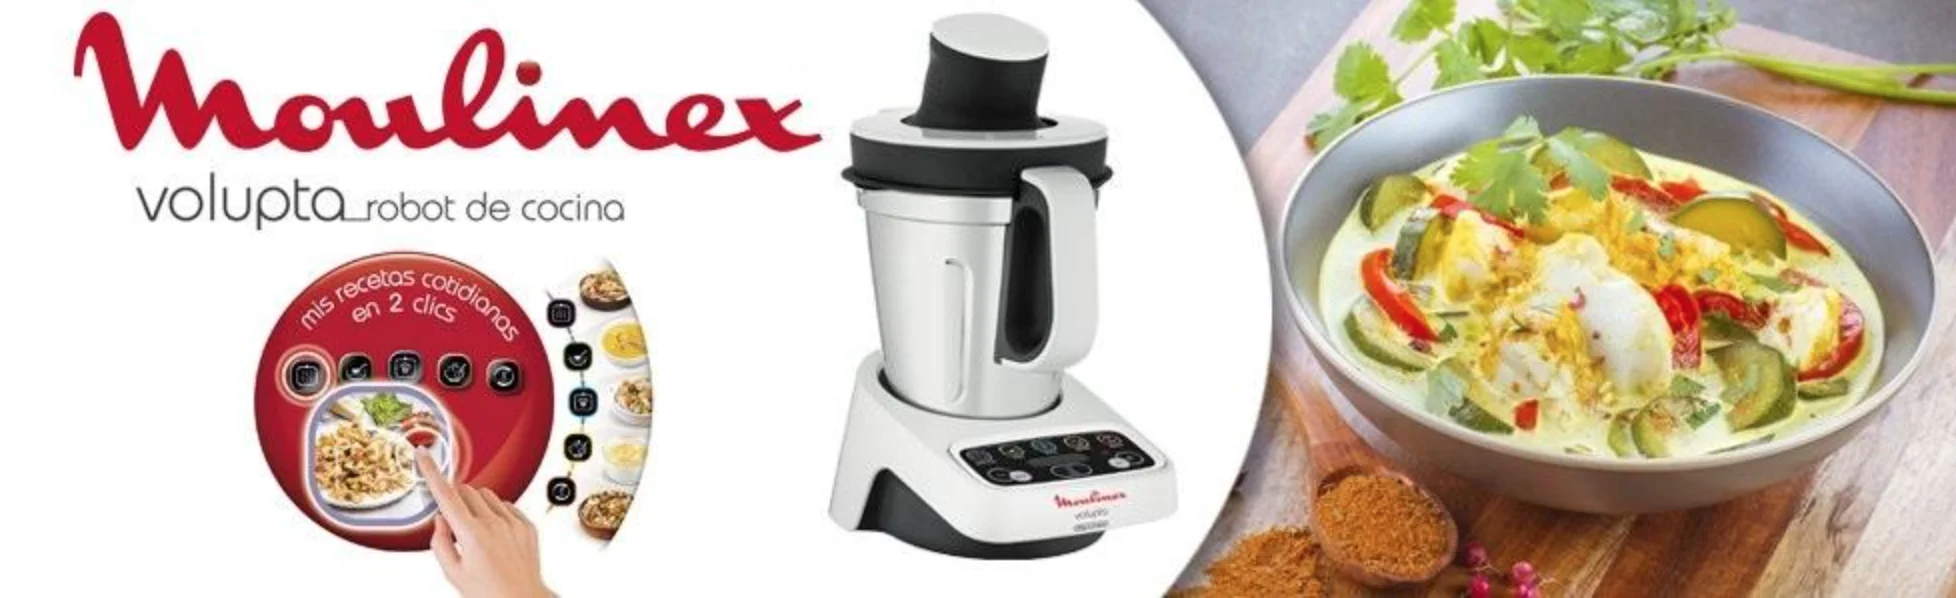 Moulinex-kitchen Robot Volupta 1000w - 5 Programs, Easy To Use, Compact,  Large Capacity, Cleaning, Dishwasher - Kitchen Robot - AliExpress